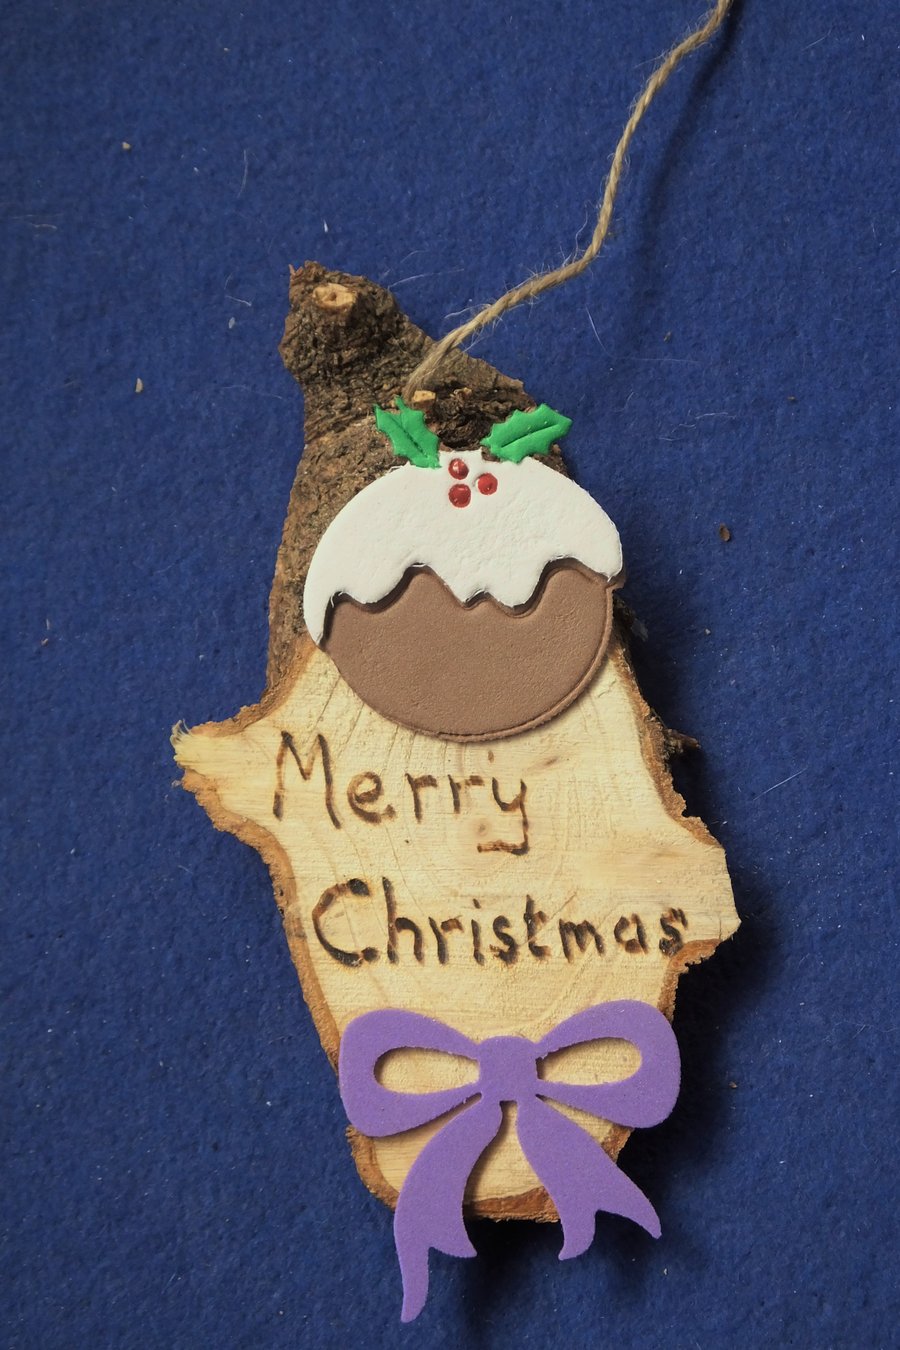 Season's greetings Merry Christmas natural wooden sign for Christmas time